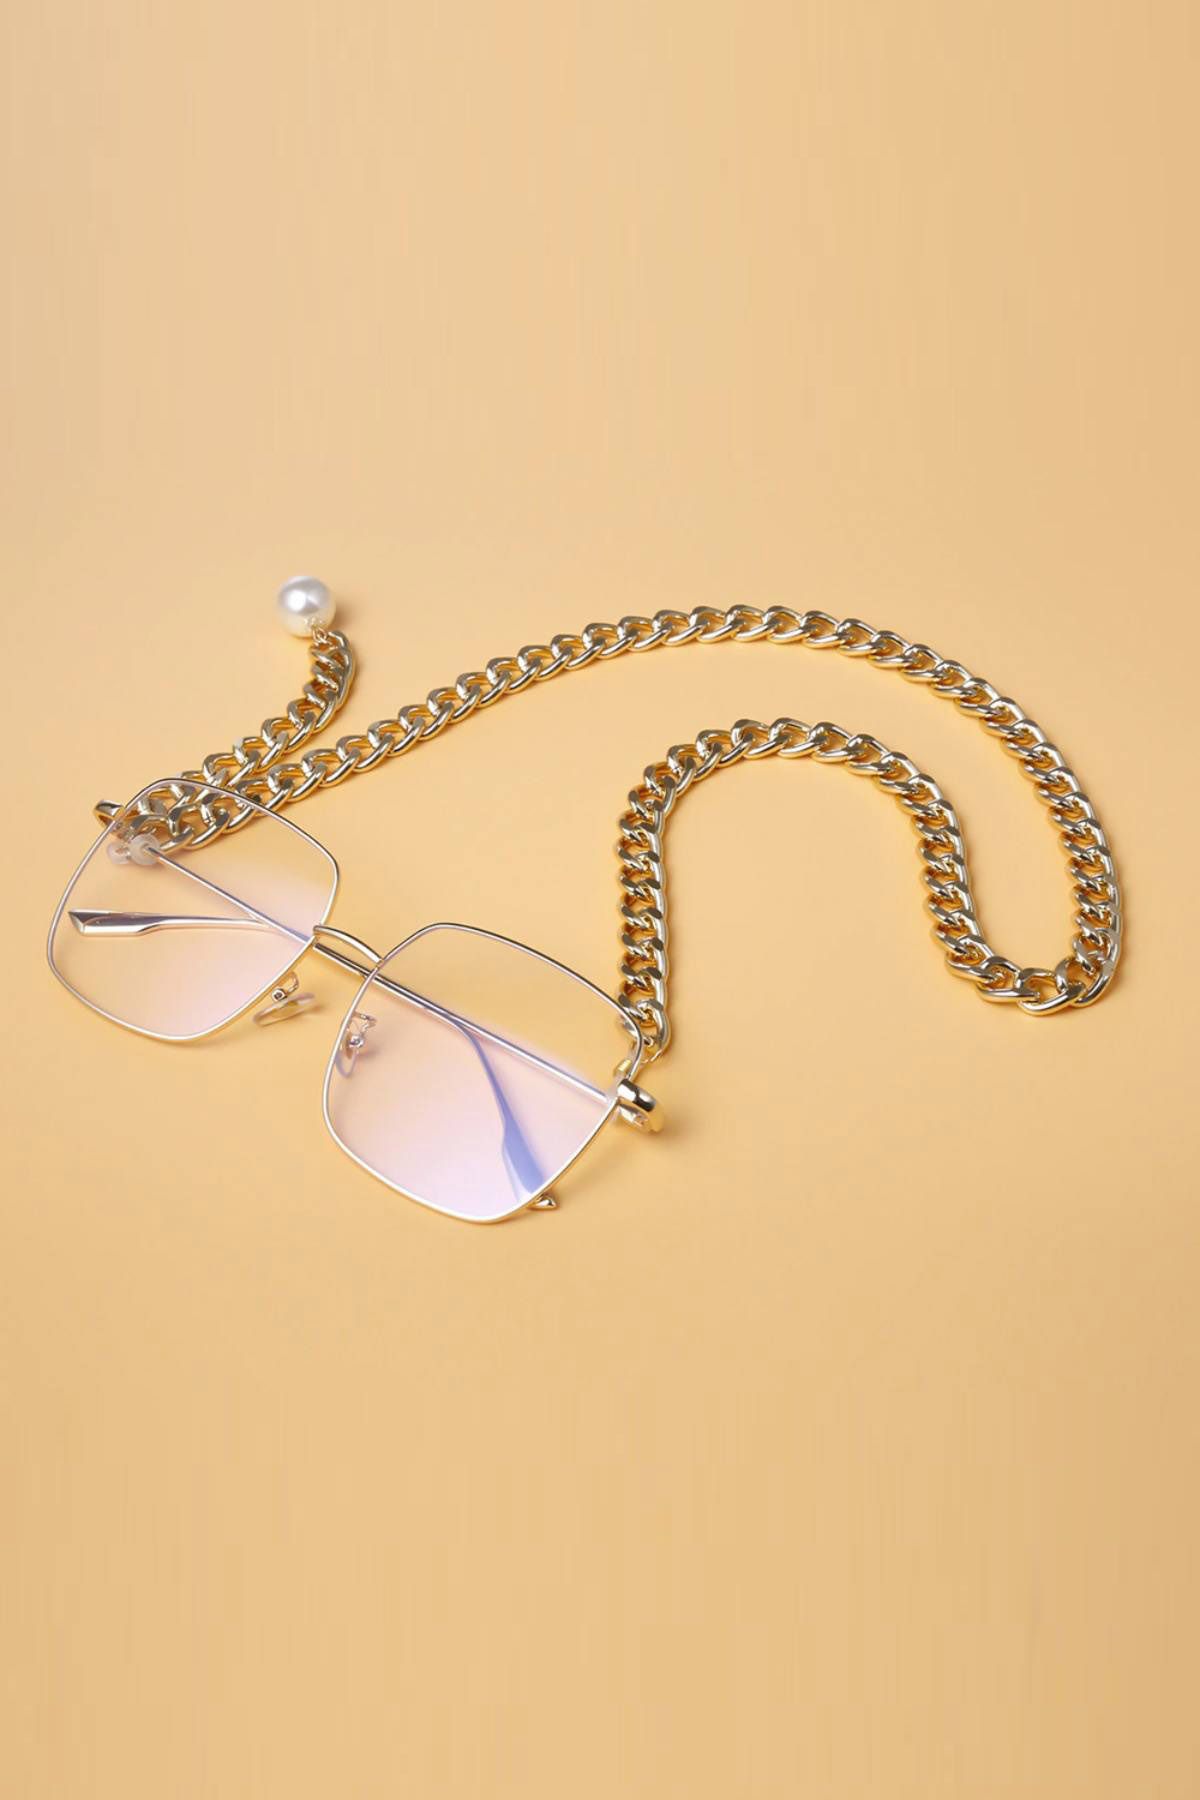 Girl With A Peral Sunglasses Chain - Gold